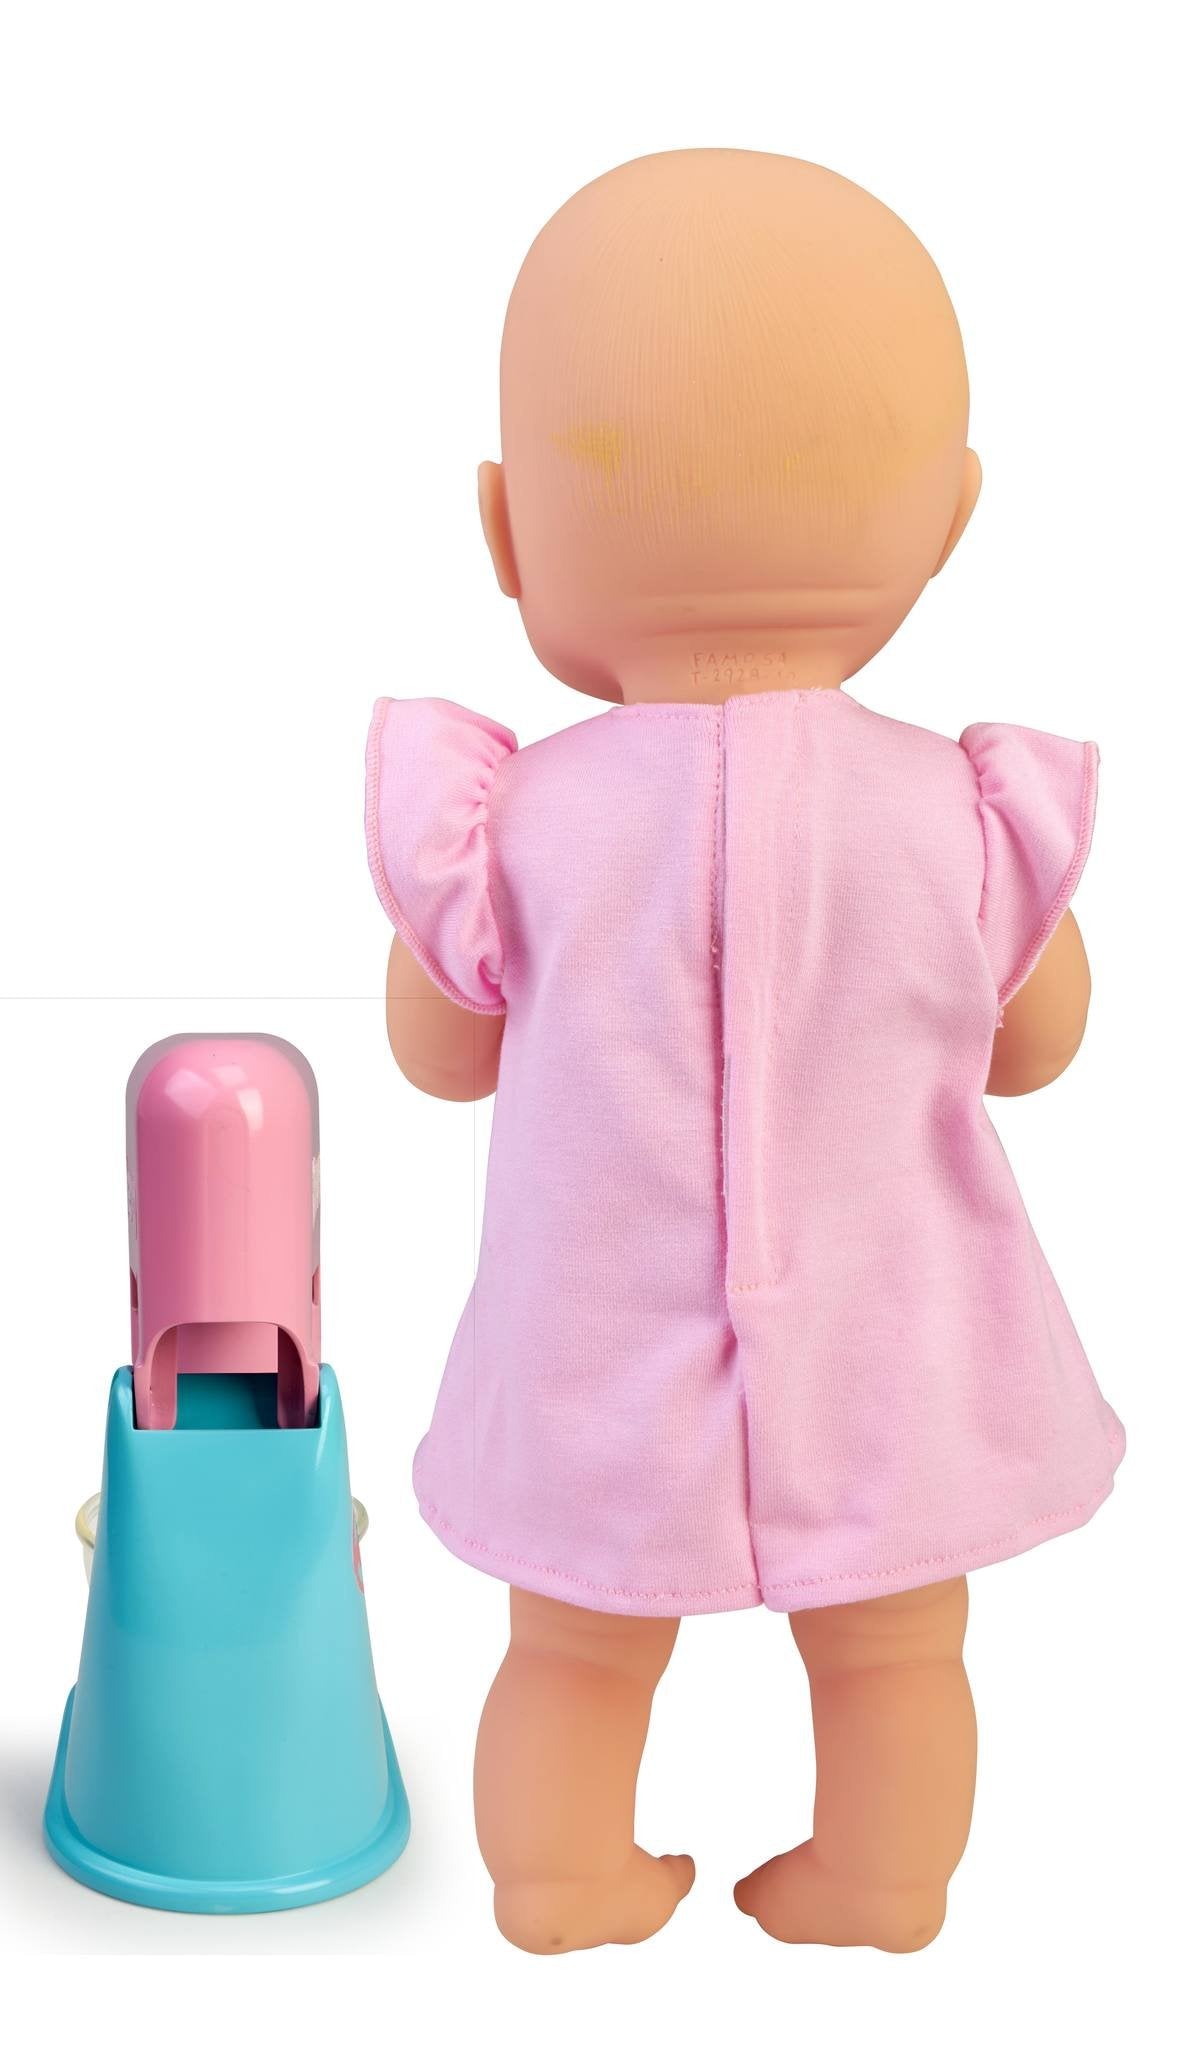 Nenuco Sara - Soft Baby Doll with 11 Real Life Functions, Bottle